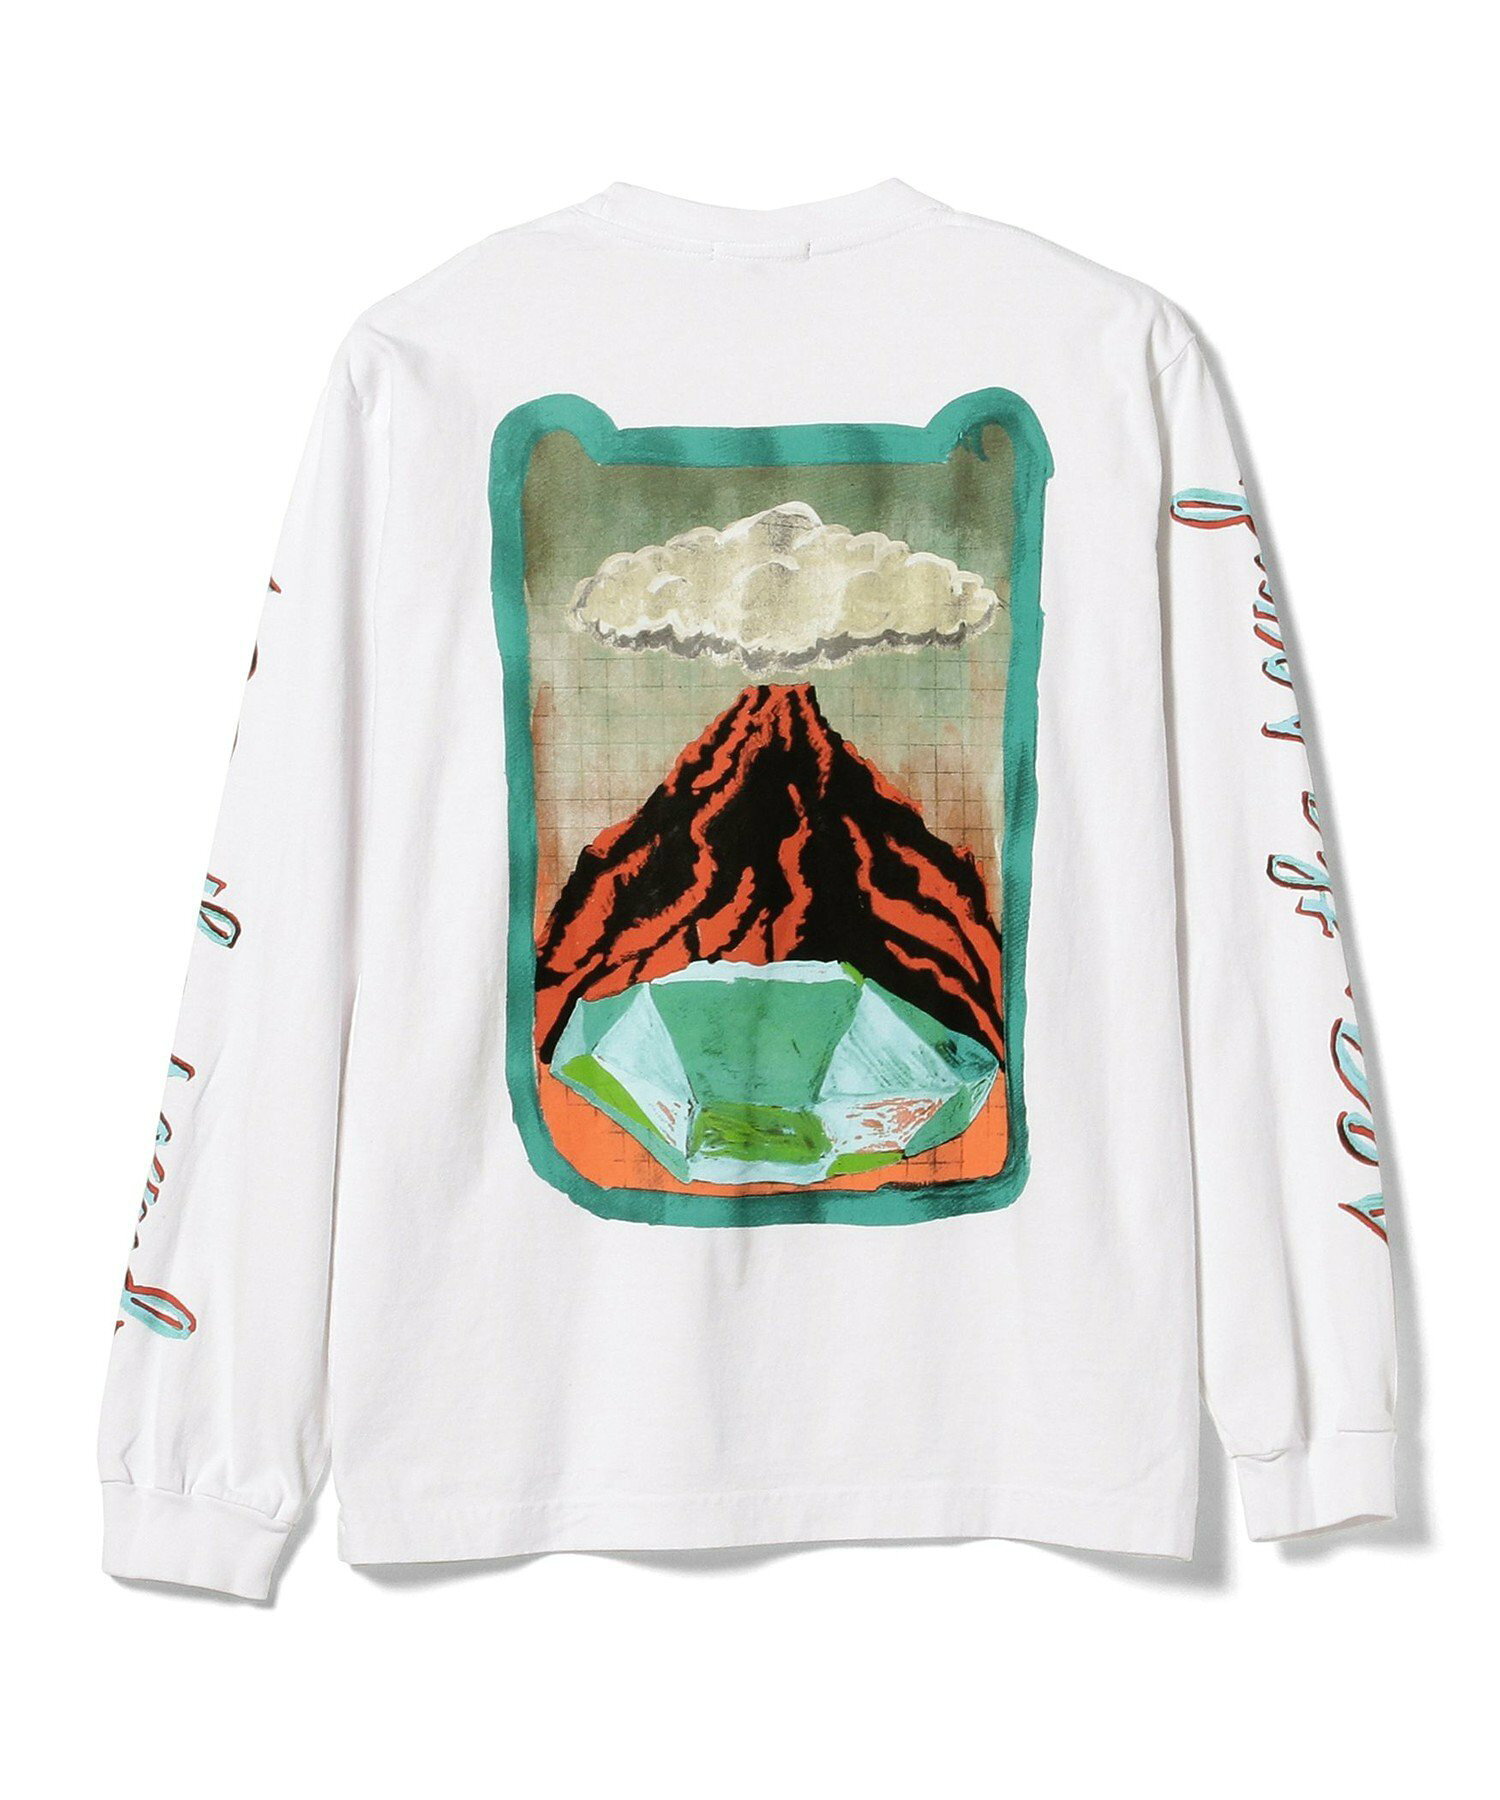 TOTAL LUXURY SPA / SEA THE SOUND LONG SLEEVE